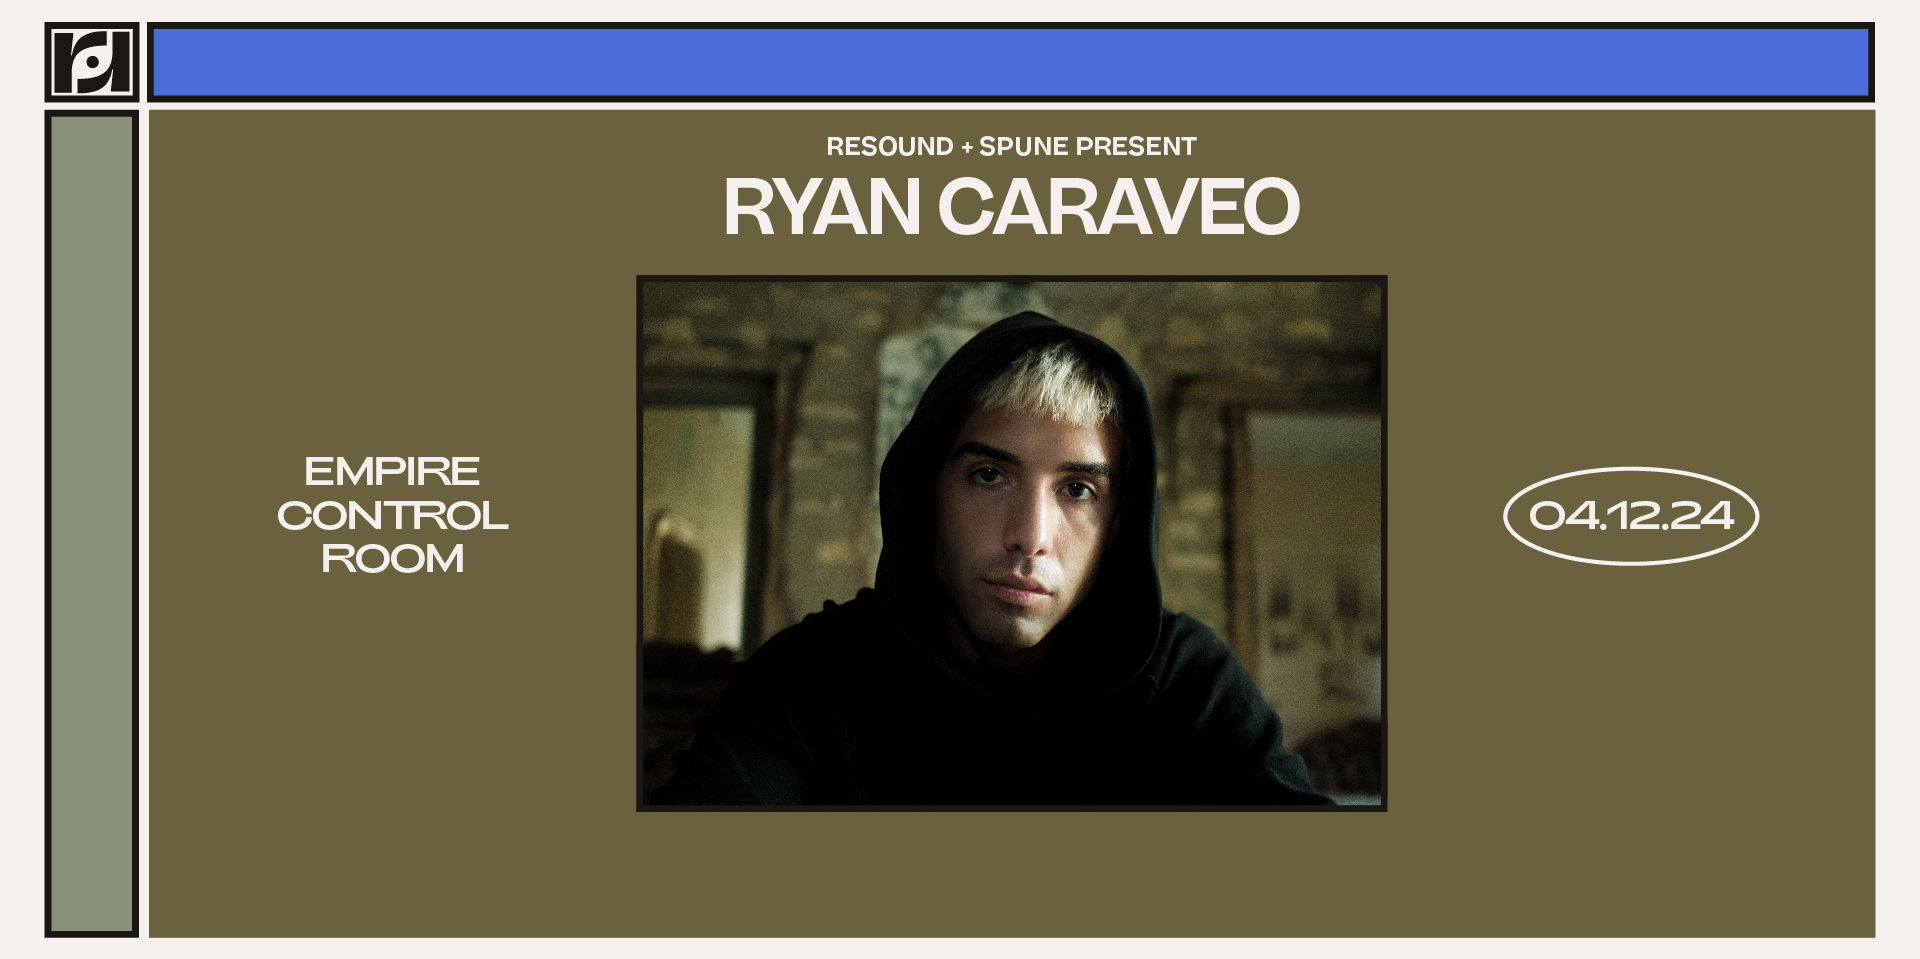 Resound and Spune Present: Ryan Caraveo - Trouble in Paradise Tour at Empire Control Room promotional image